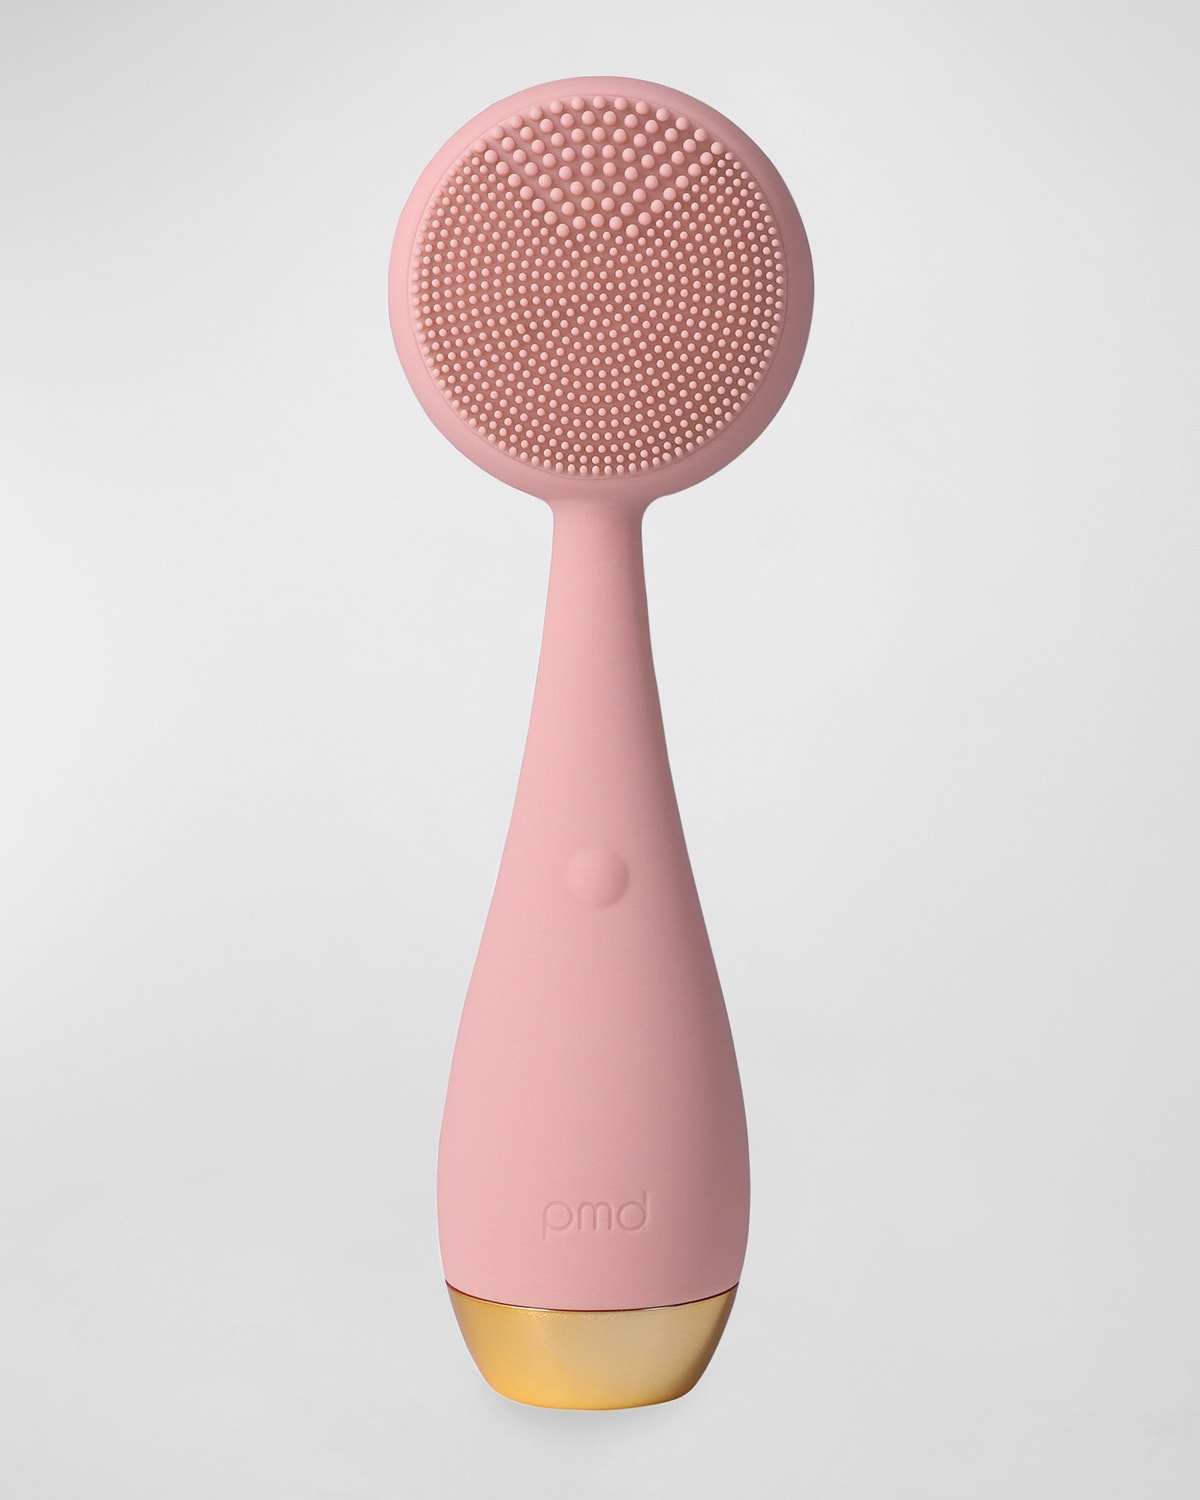 Shop Pmd Beauty Clean Smart Facial Cleansing Device In Pink/gold